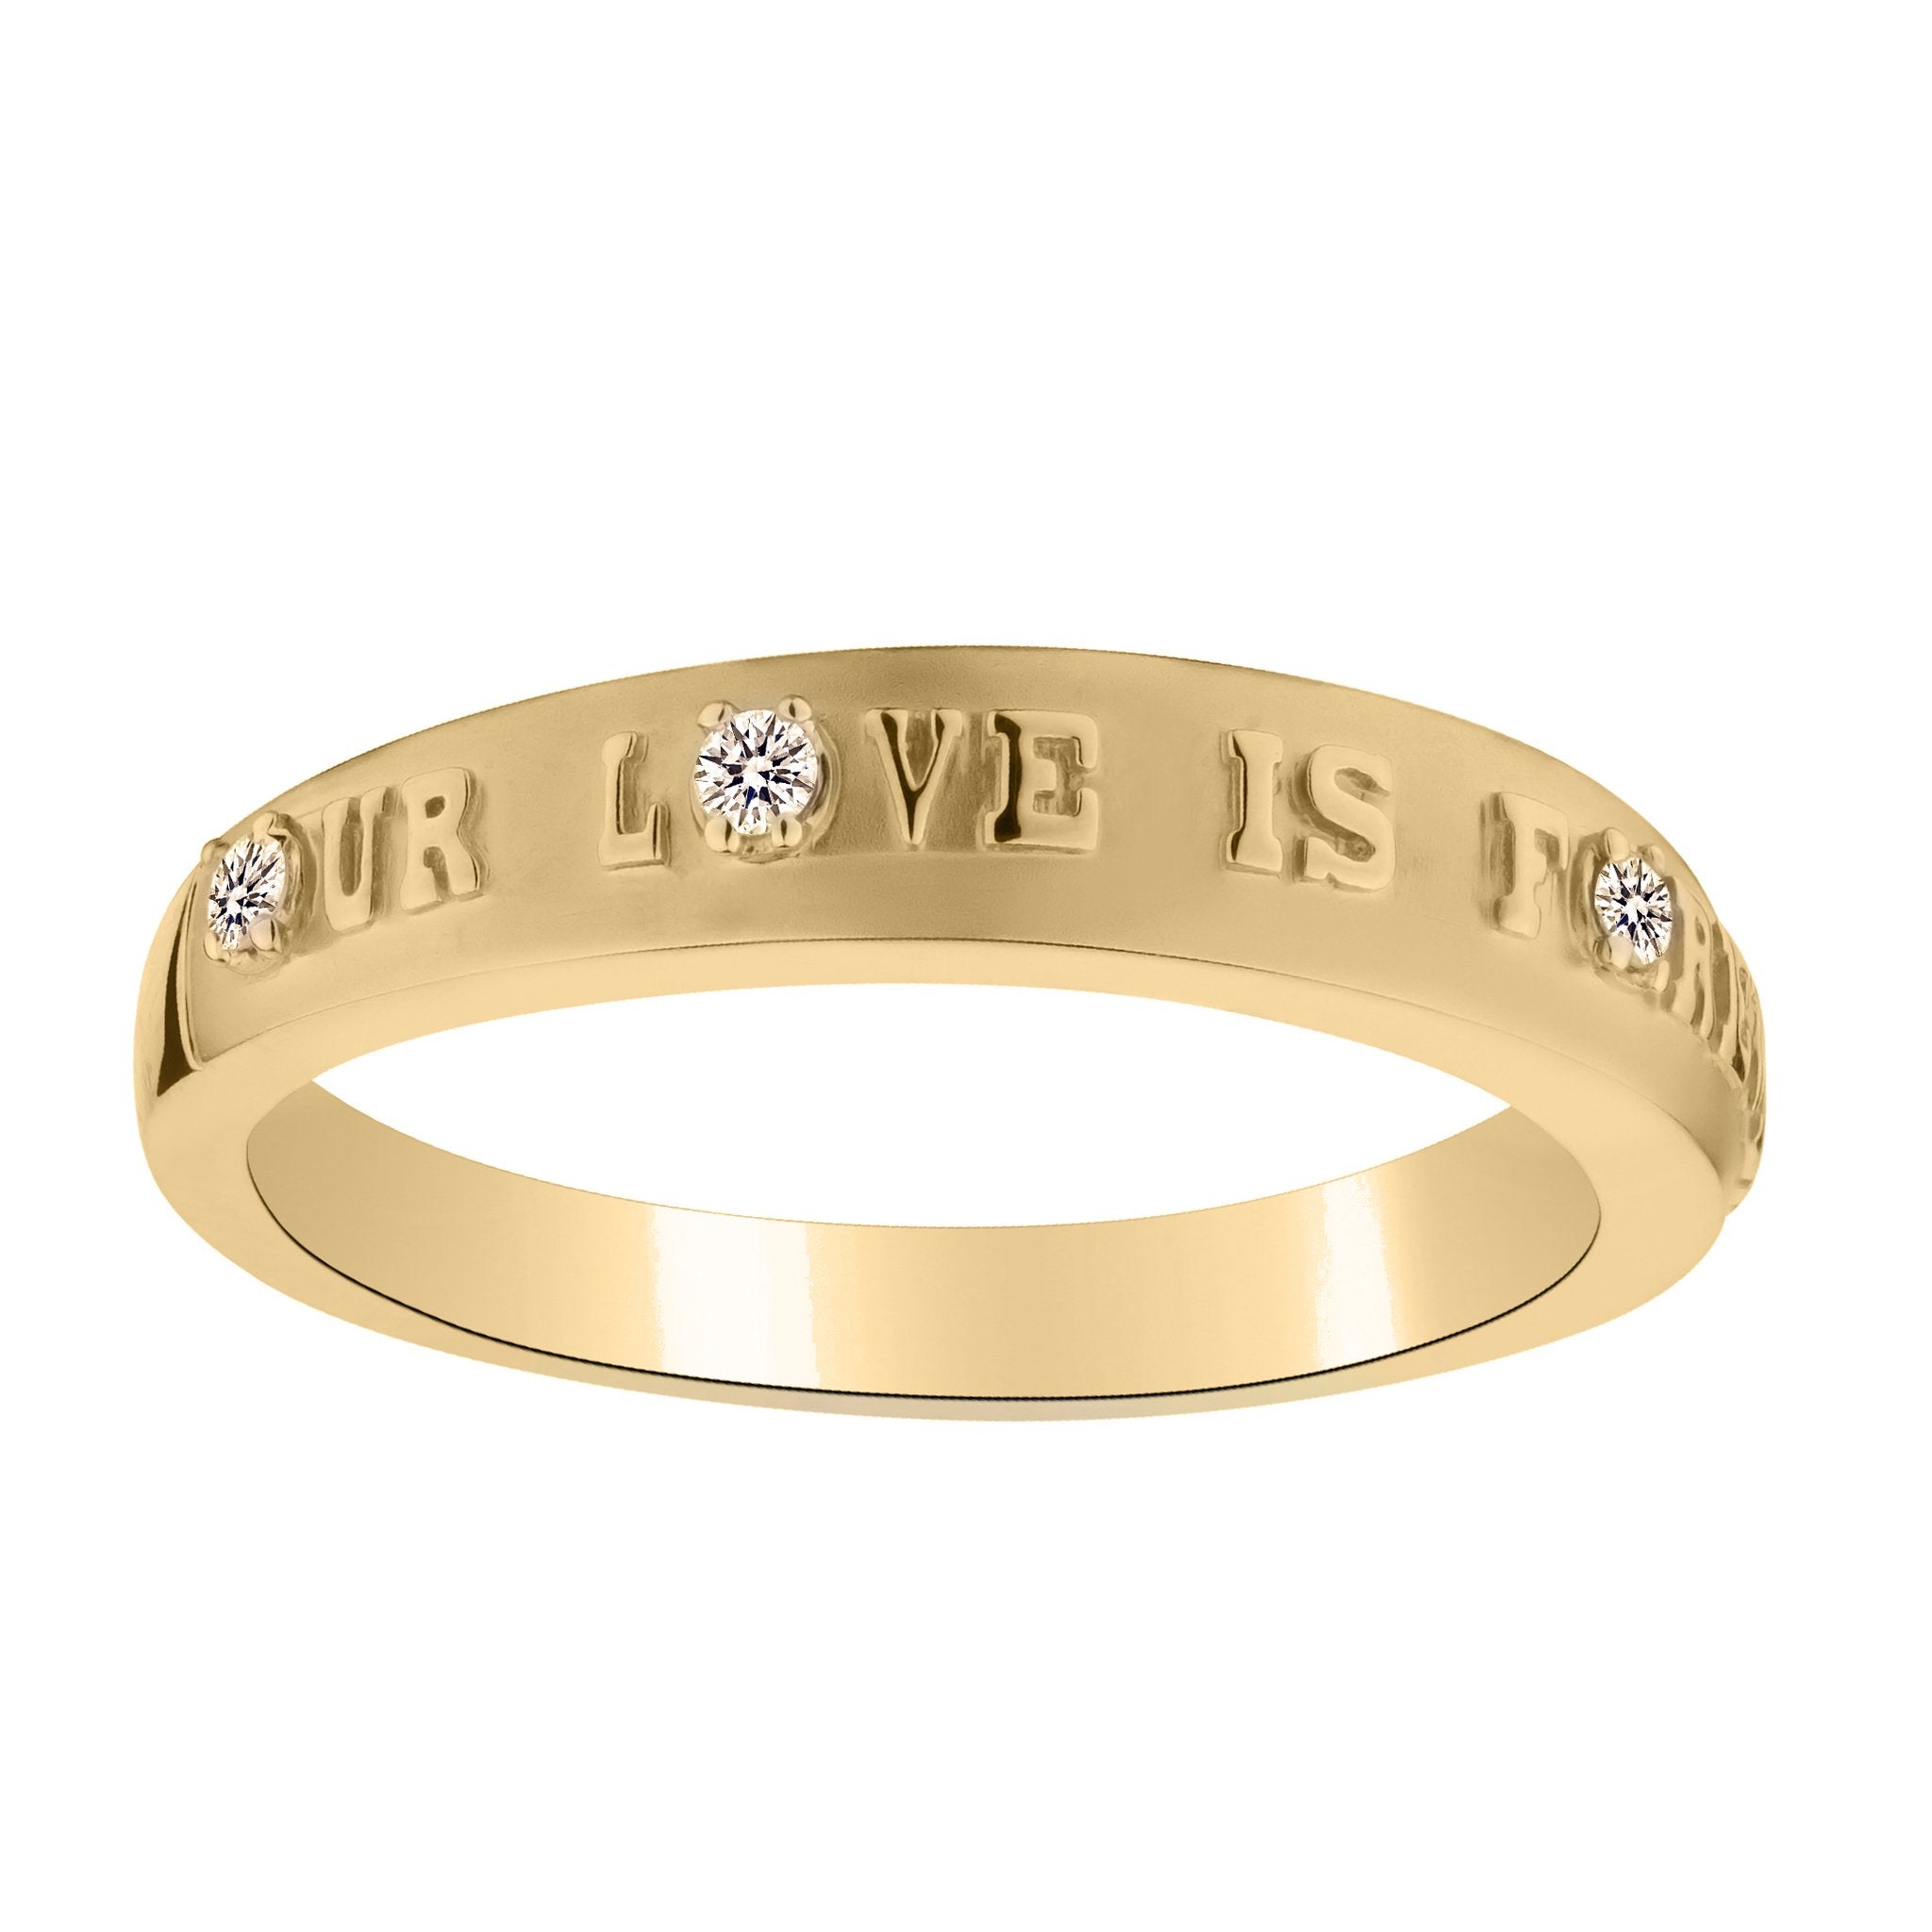 .05 CARAT "OUR LOVE IS FOREVER" DIAMOND RING, 10kt YELLOW GOLD...................NOW - Griffin Jewellery Designs